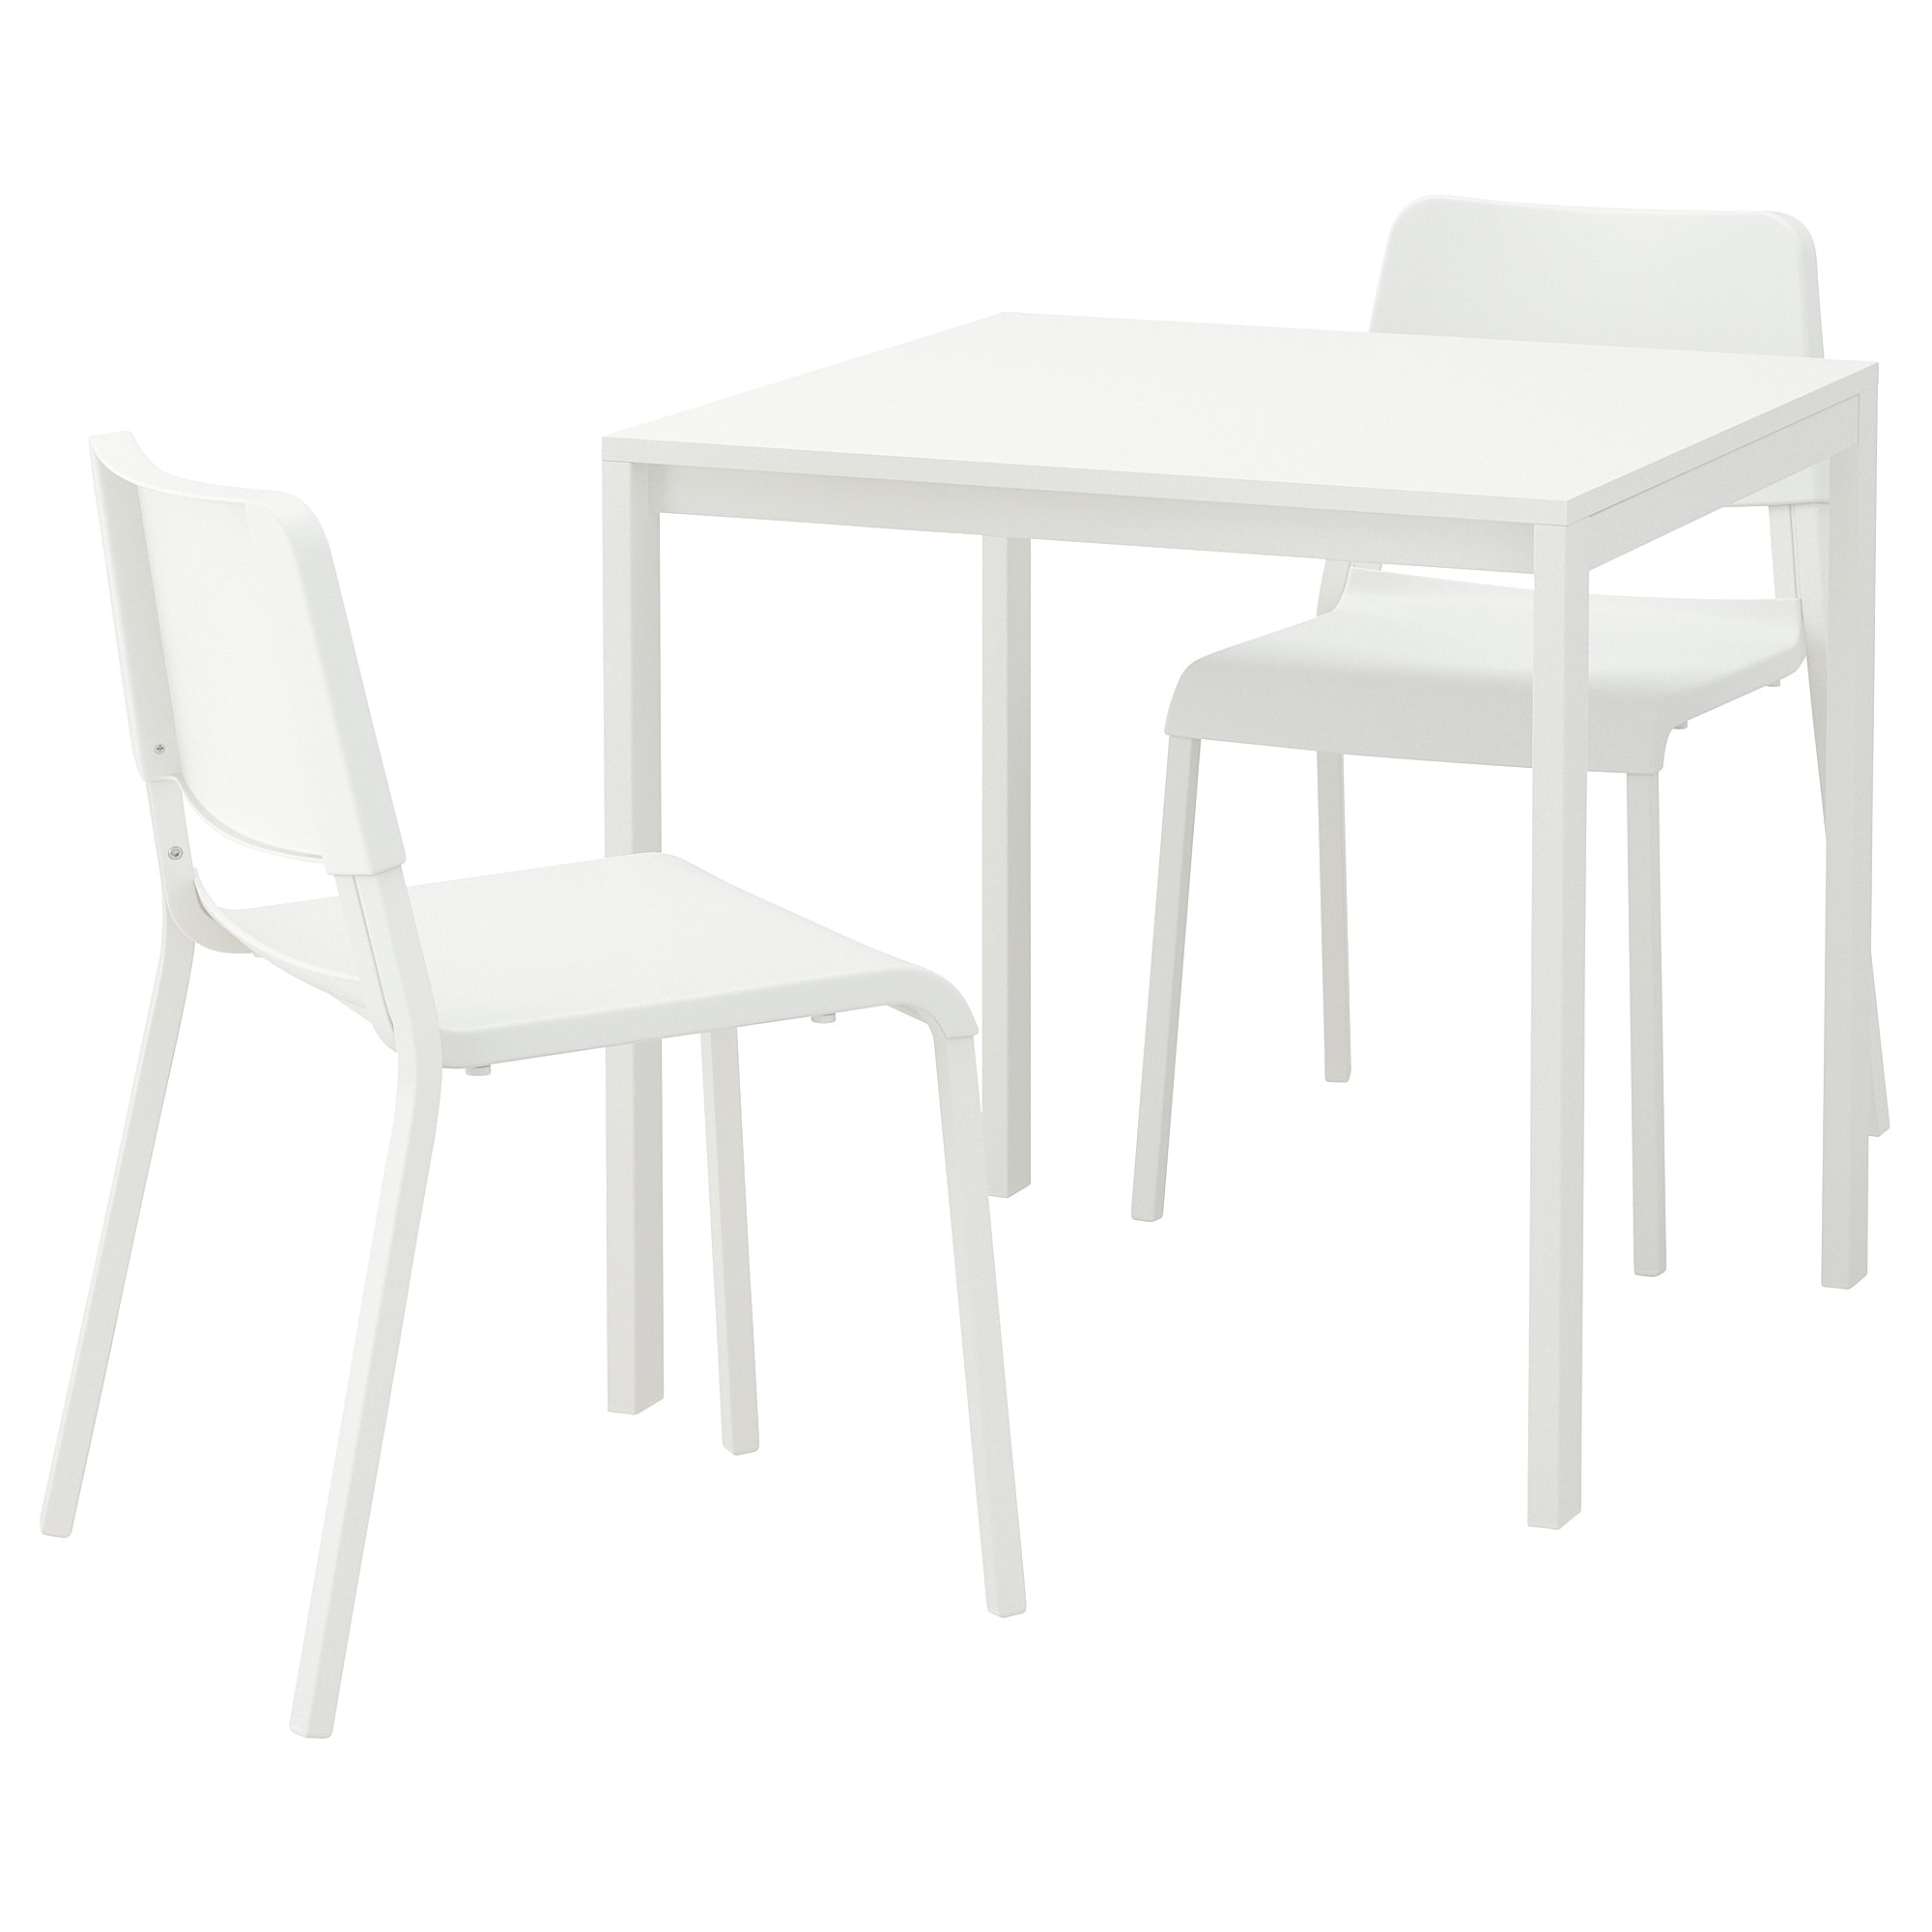 Melltorp Teodores Ikea Dining Sets, Ikea White High Gloss Dining Table And Chairs Set